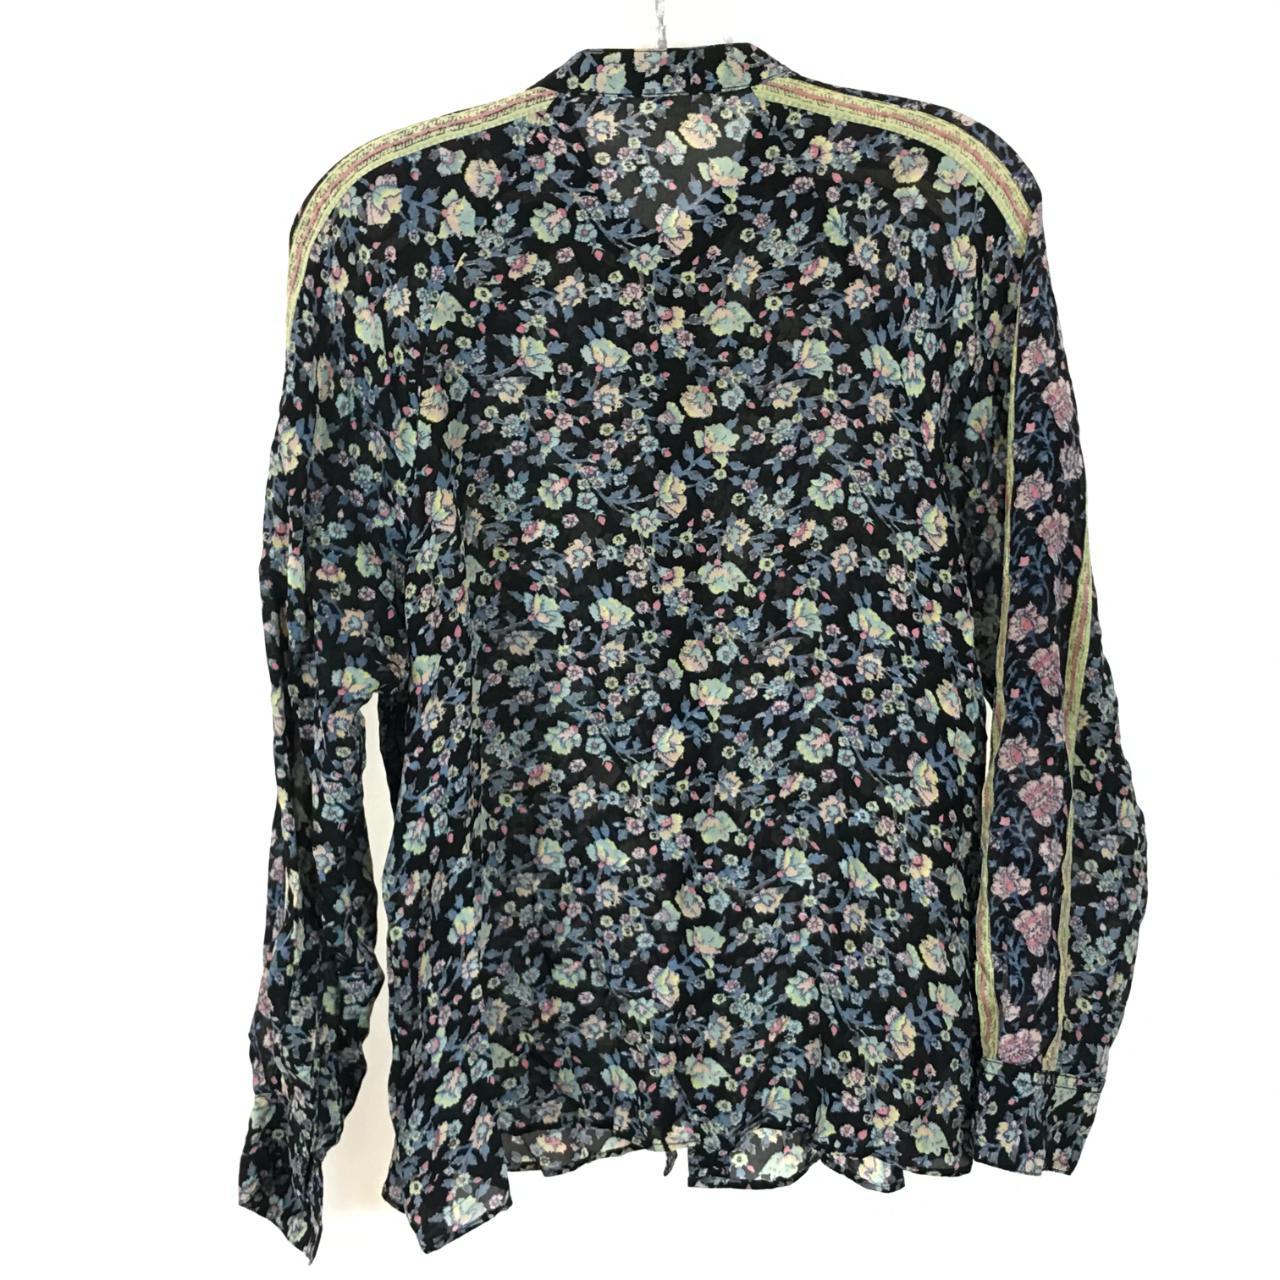 Product Image 3 - Skyway Drive In Blouse
Anthropologie -